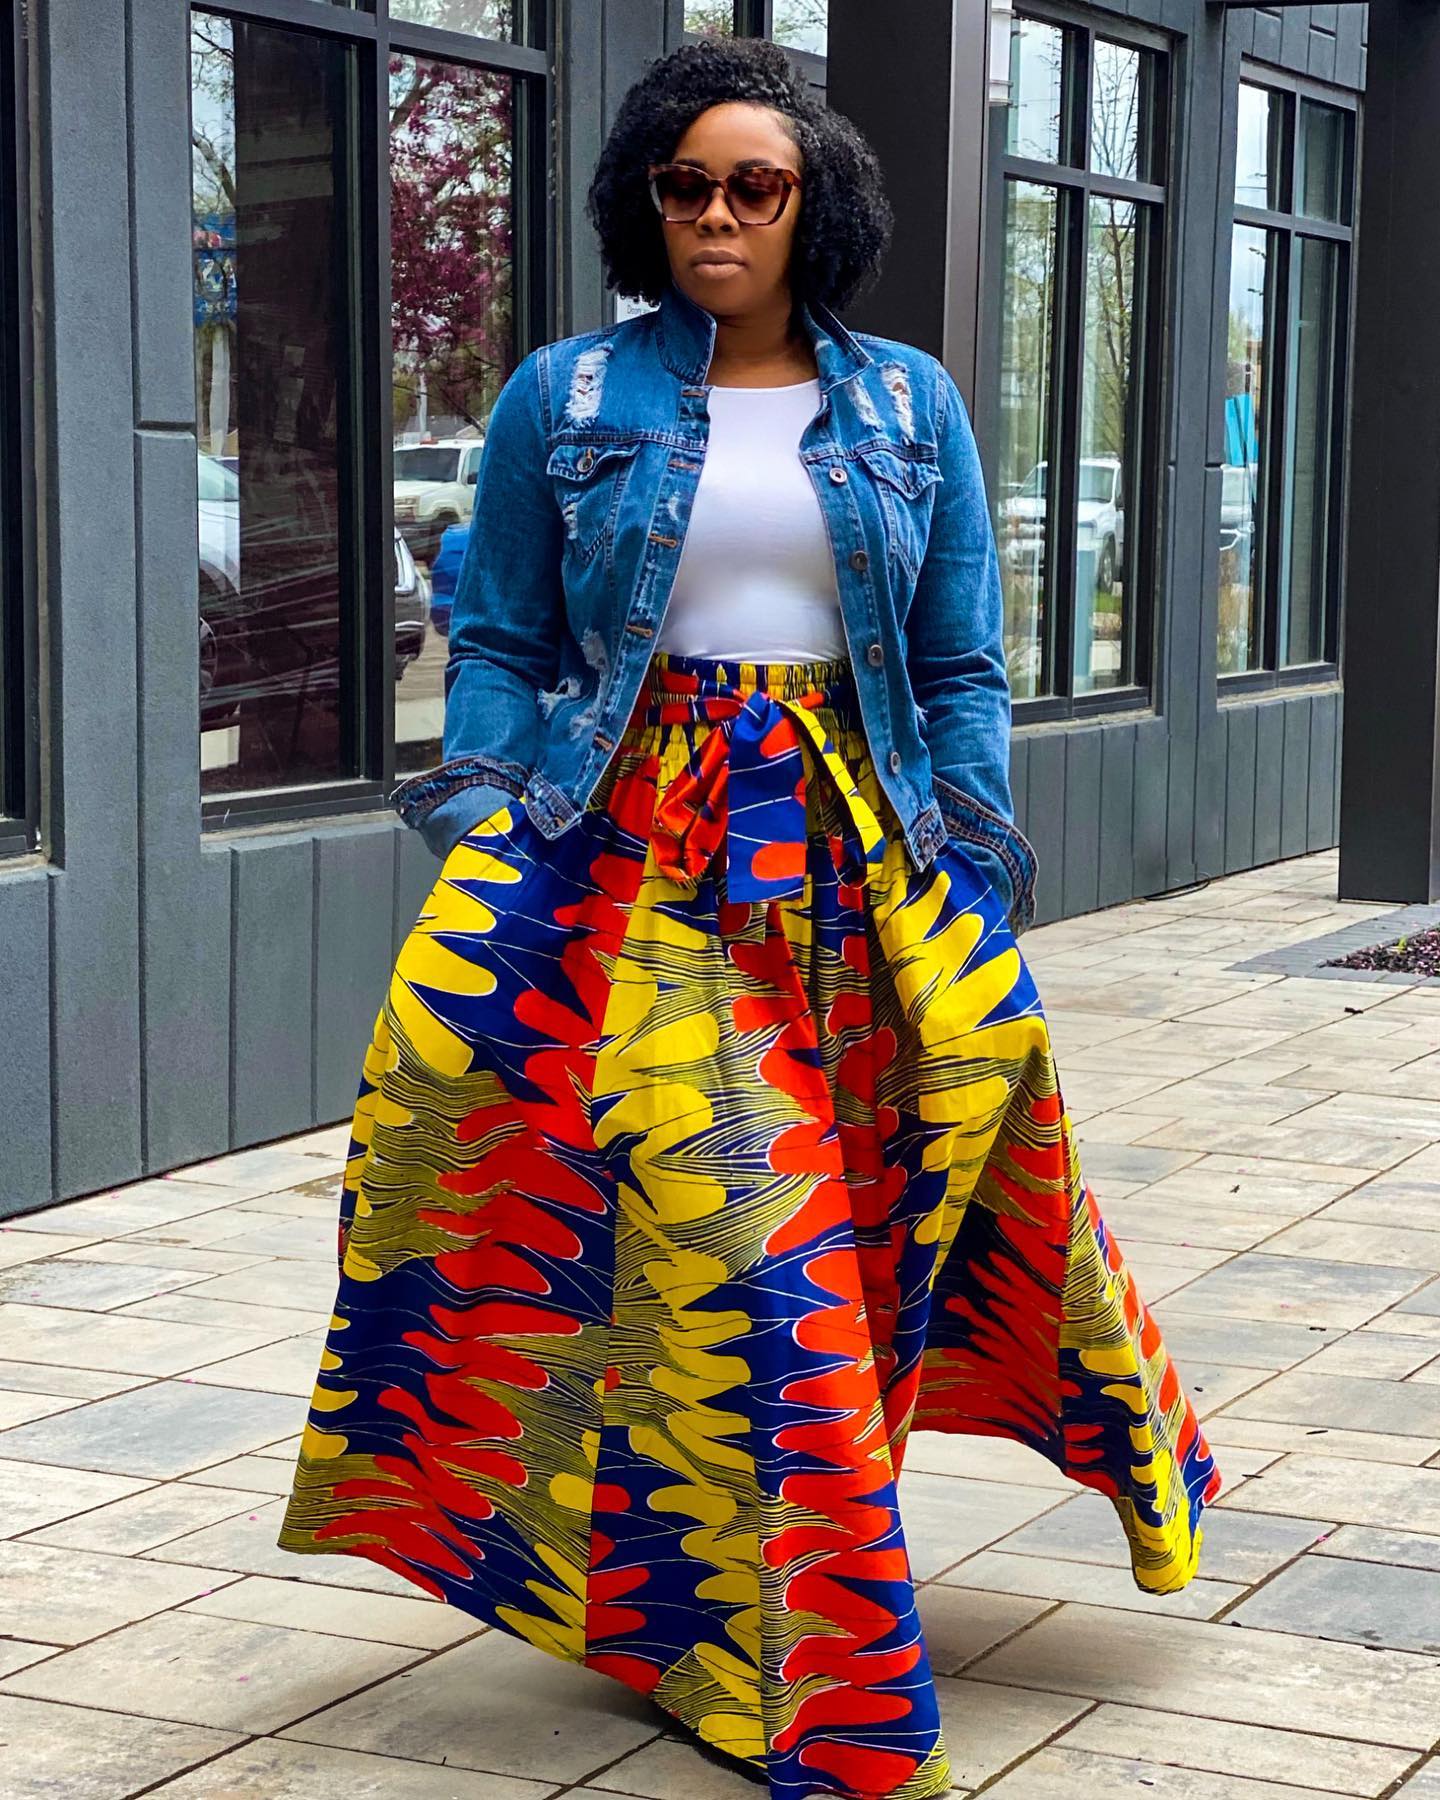 African traditional skirts 2021 for African women - traditional skirts